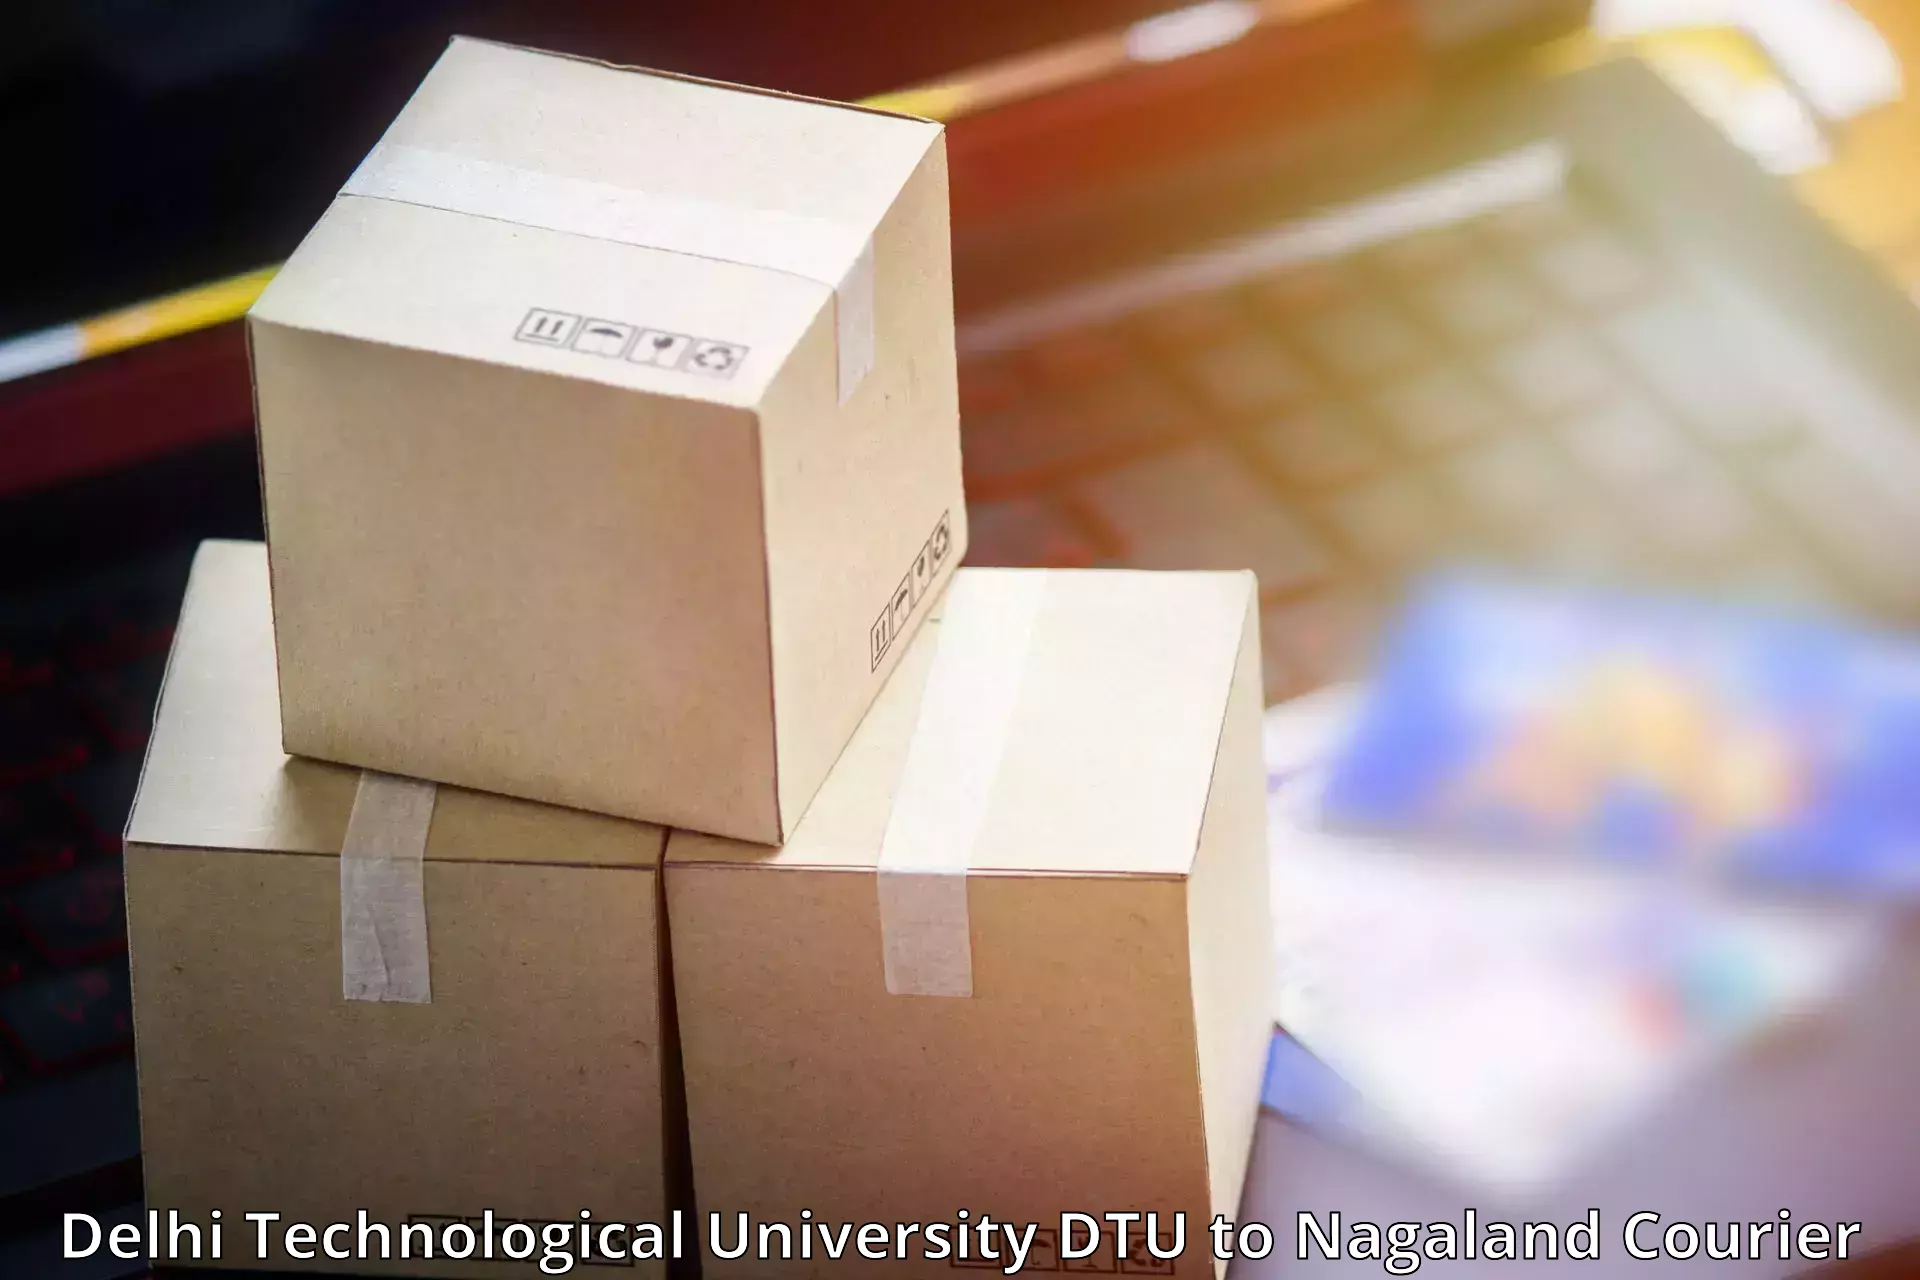 Ground shipping in Delhi Technological University DTU to Nagaland